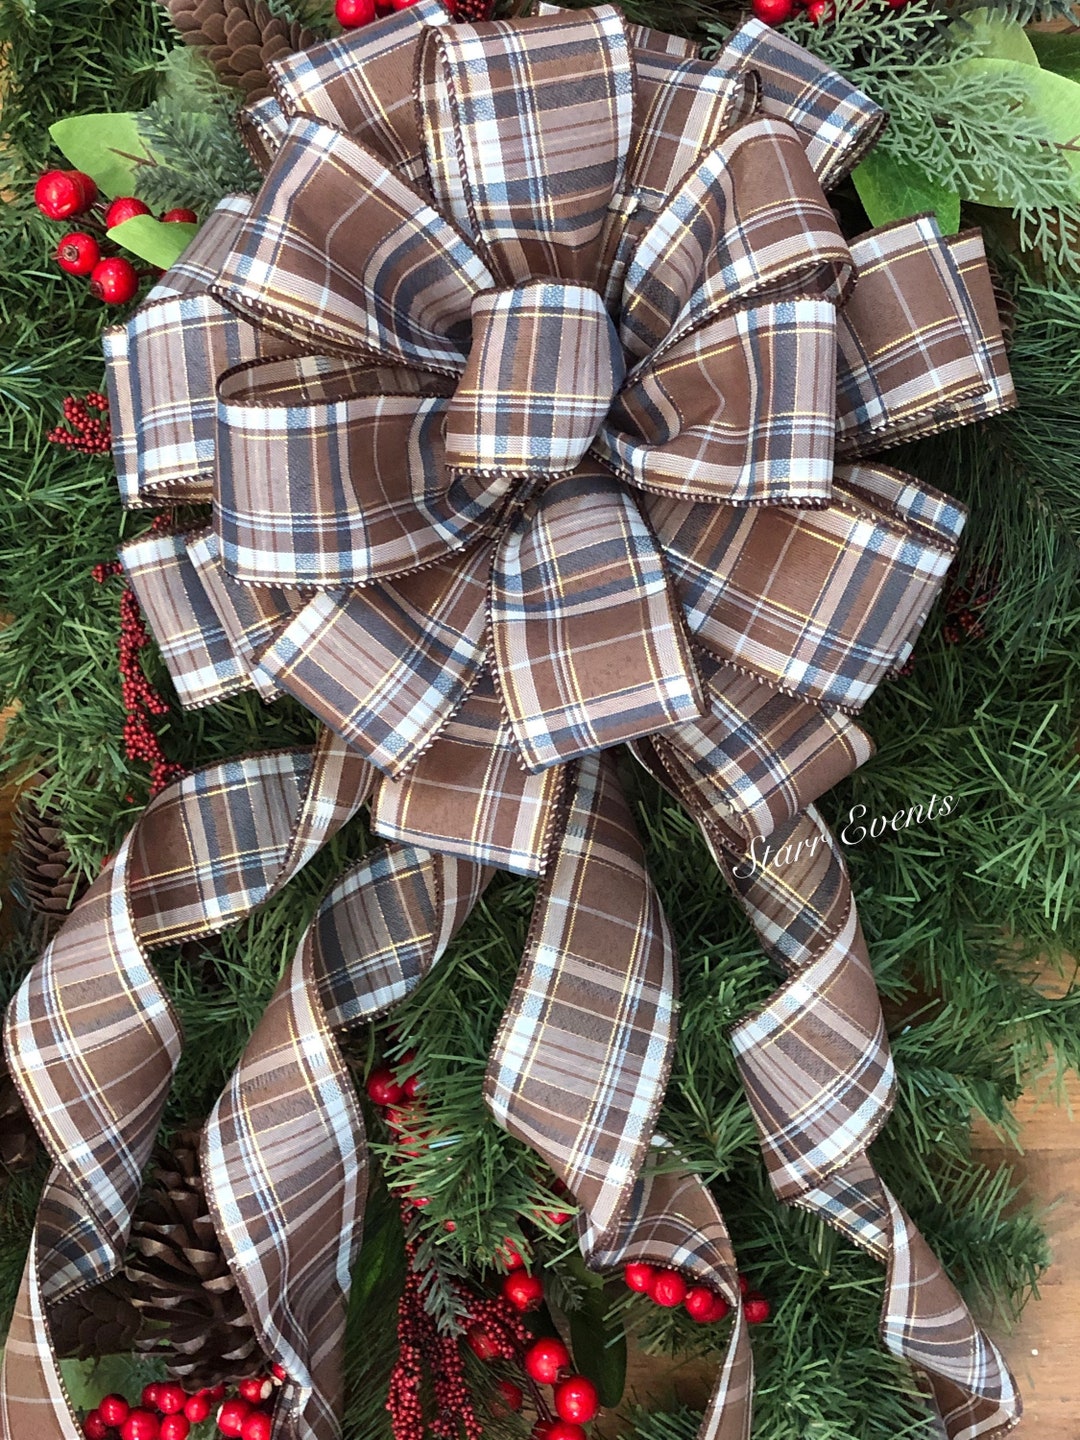 Yarn Christmas Tree Decor With Plaid Ribbon and Rusty Star Topper, Set of 3  